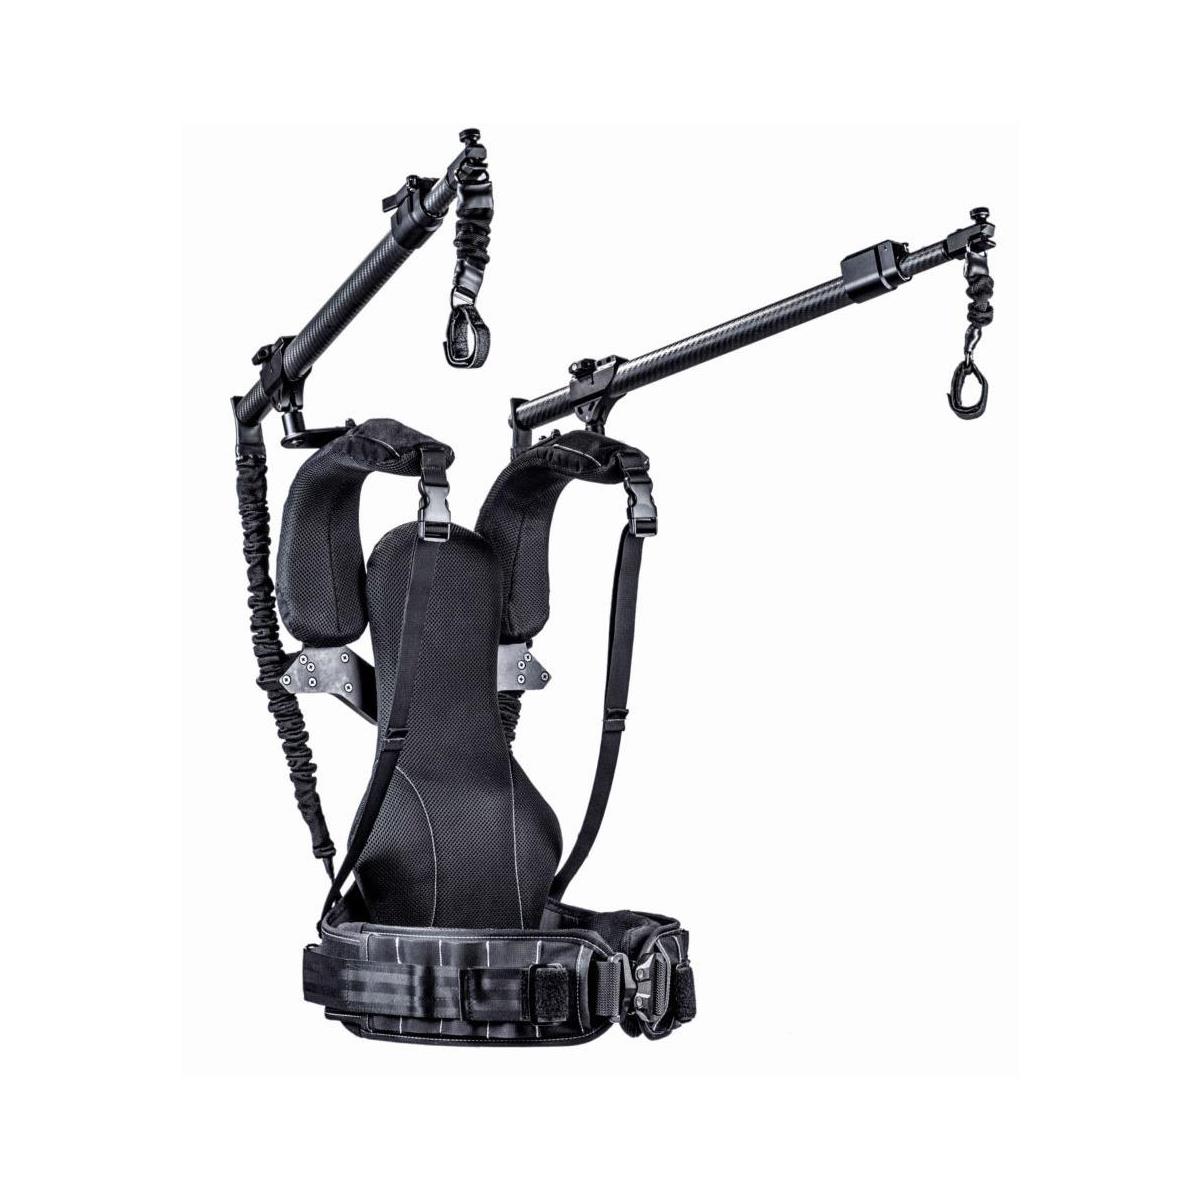 

Ready Rig GS Stabilizer + ProArm Kit with Case, 40 Lbs Capacity